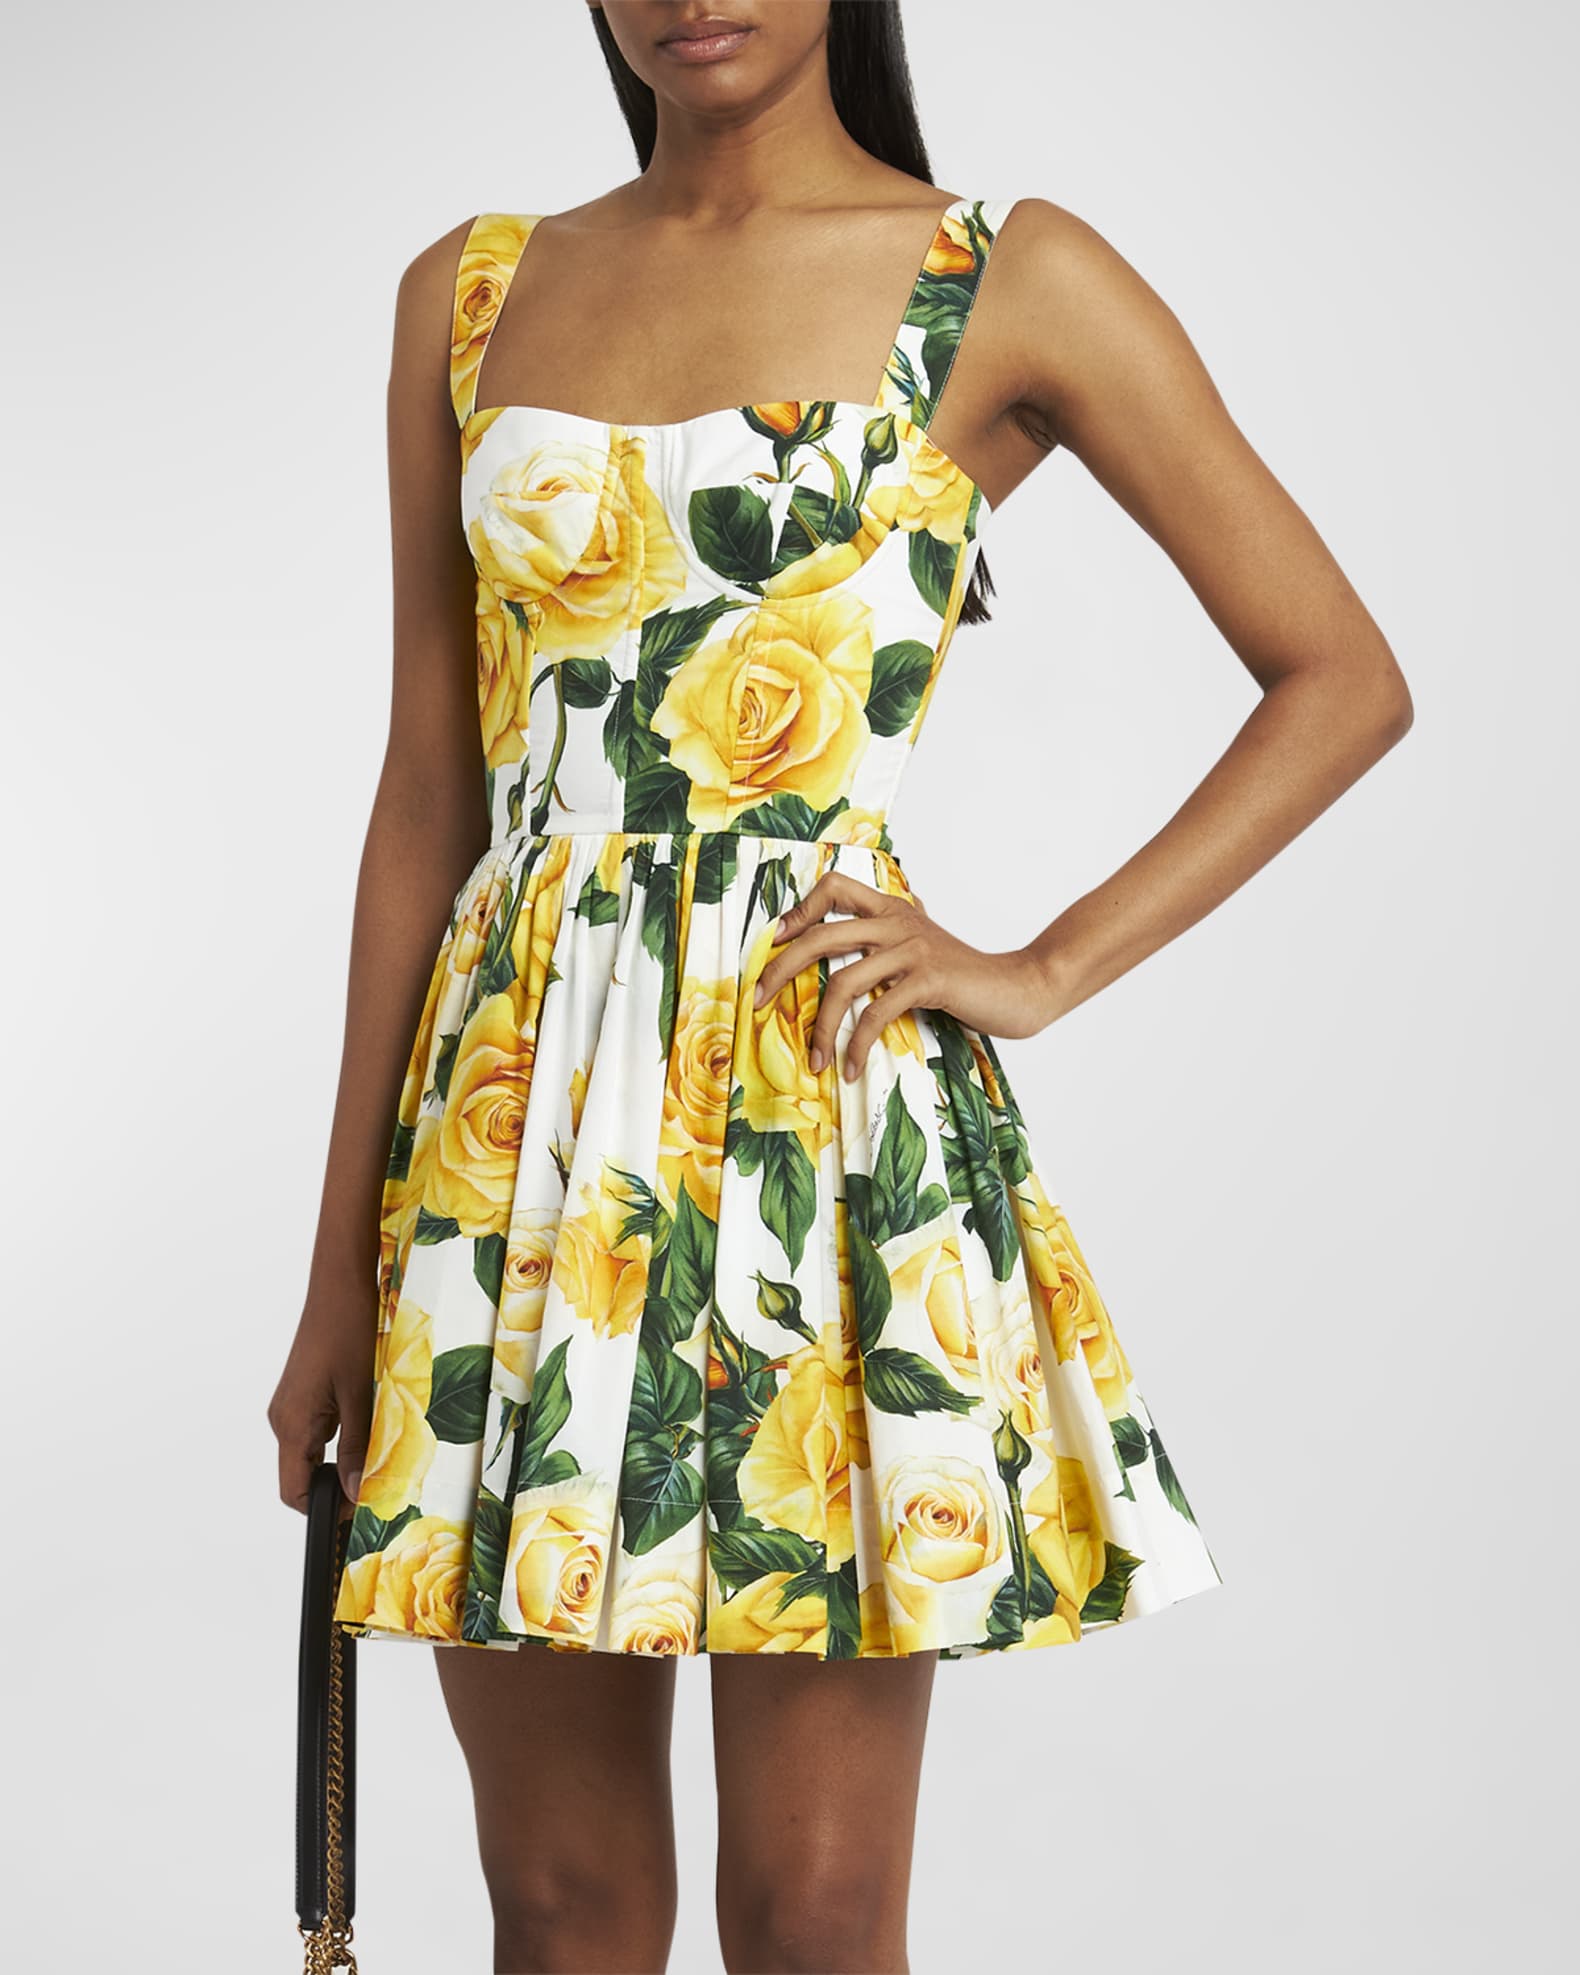 Yellow Rose Floral Print Mini Dress with Corsetry Construction